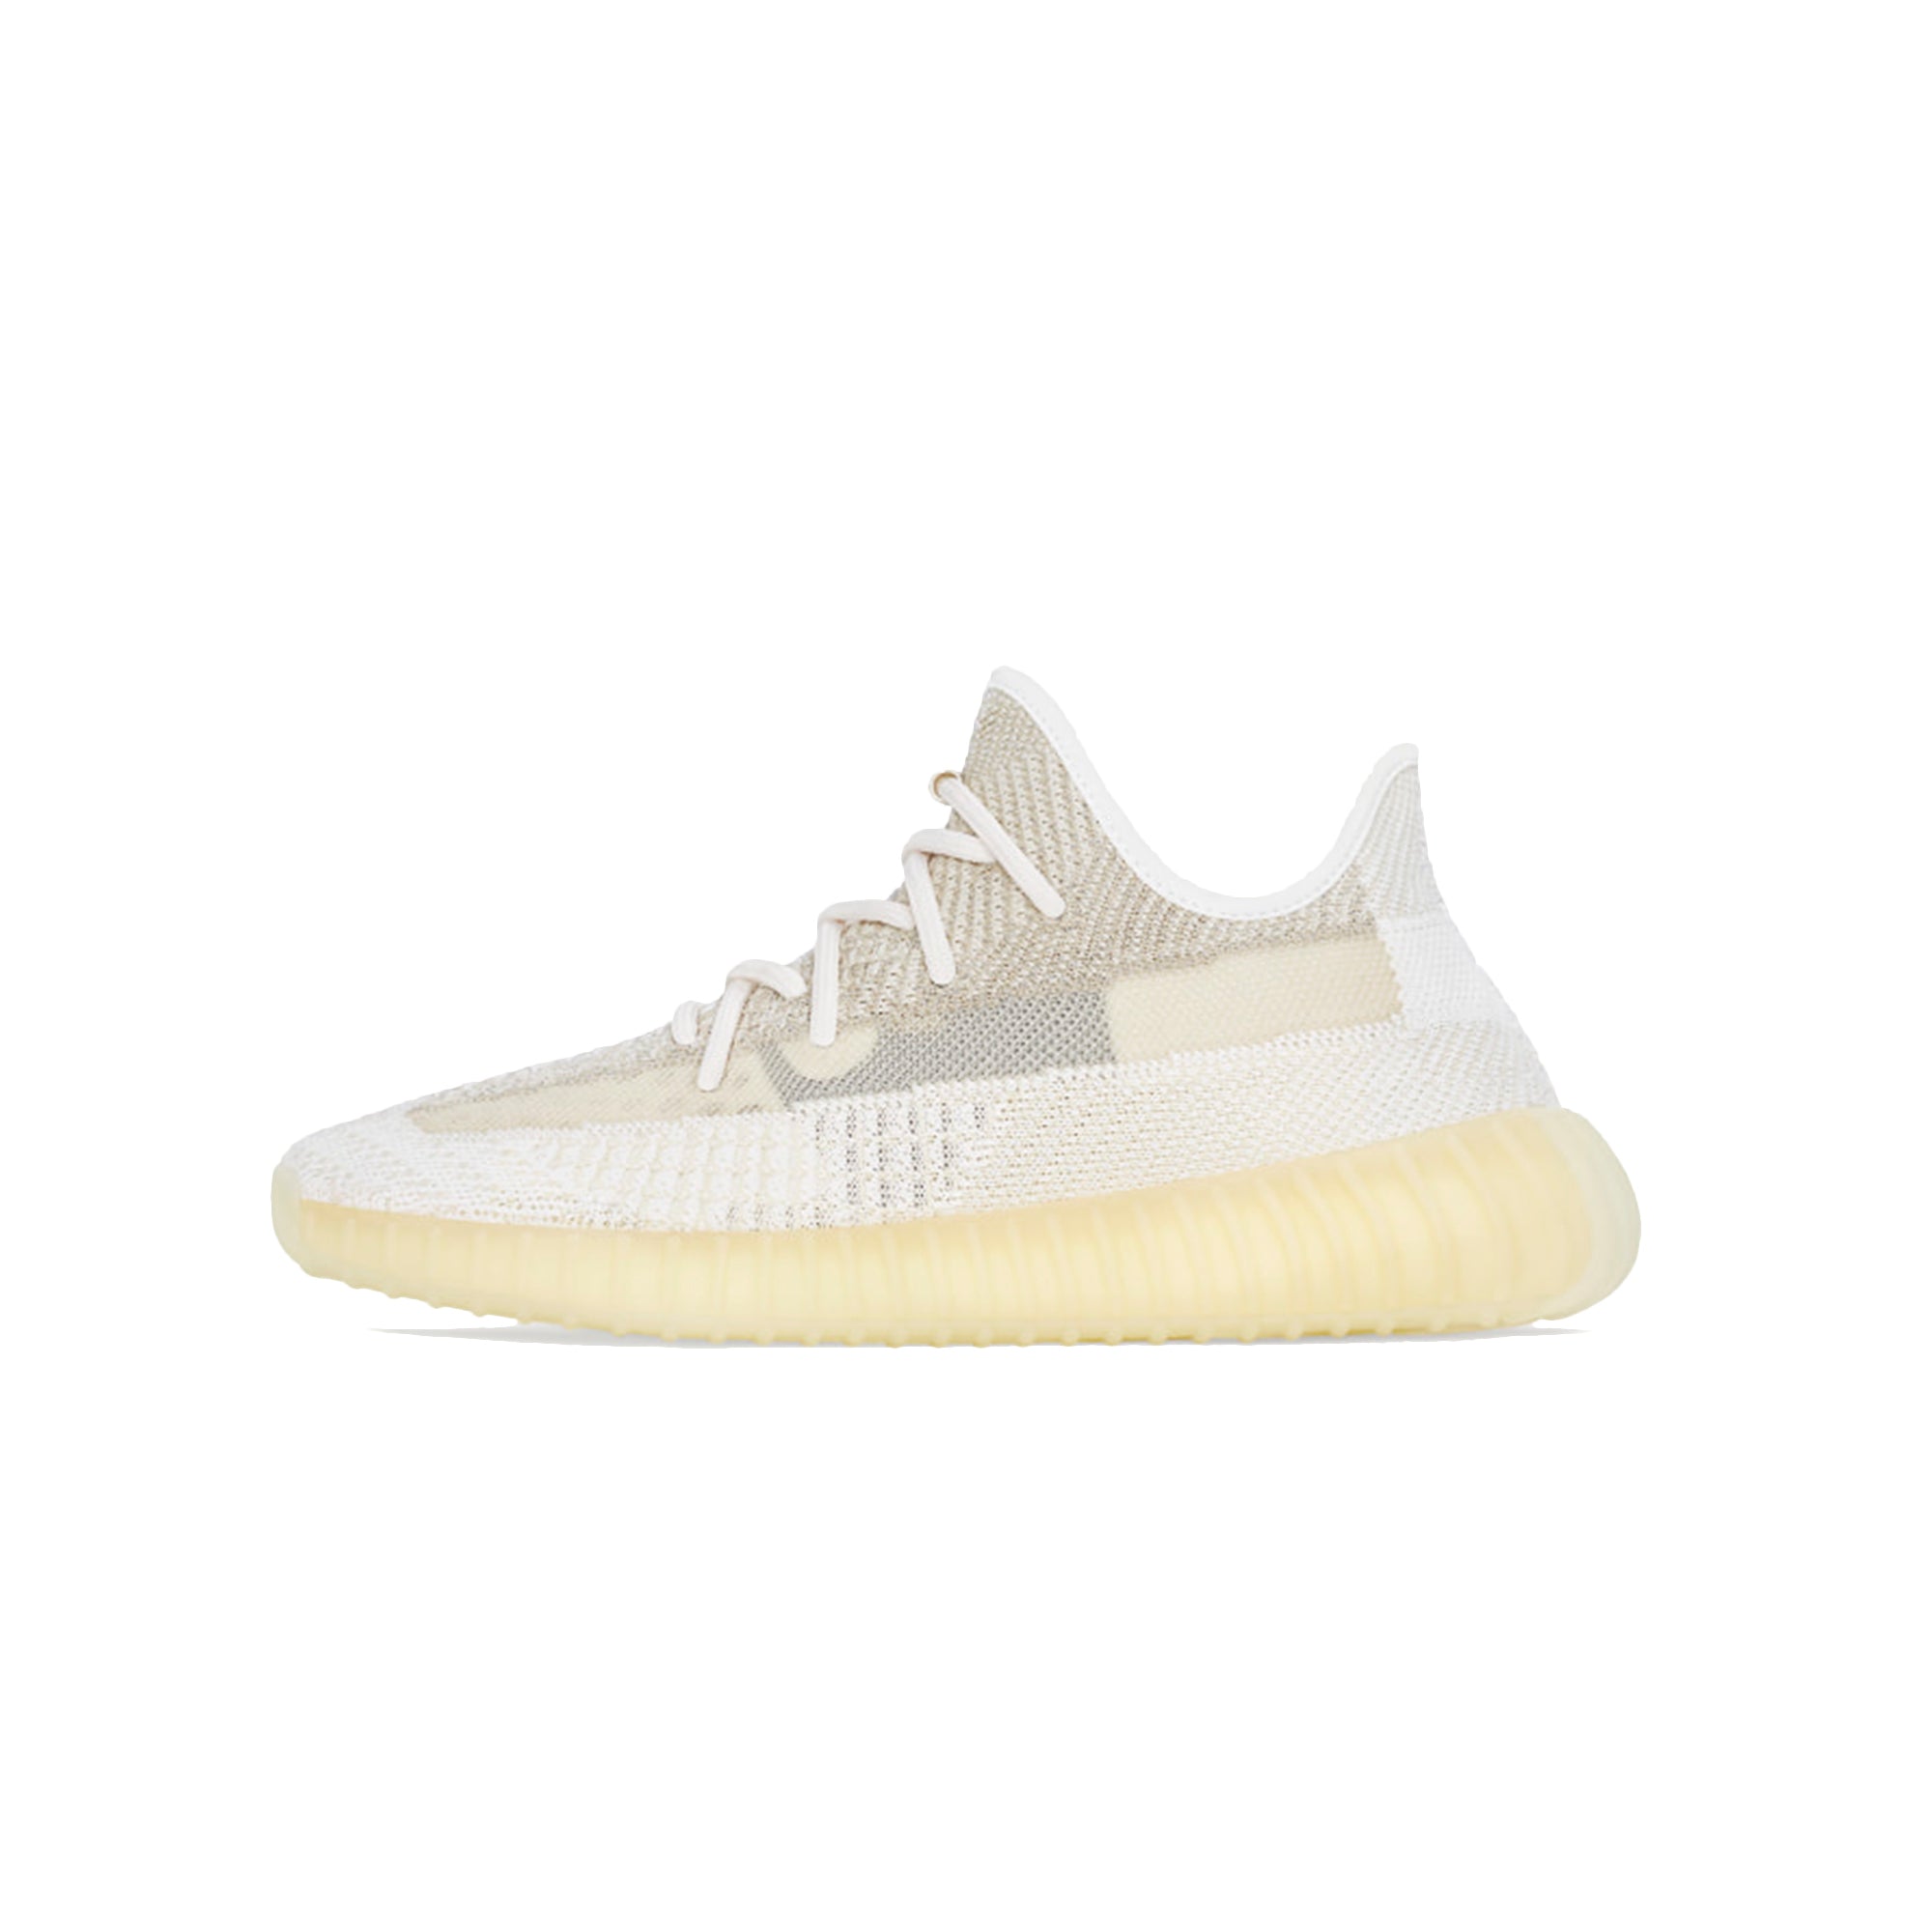 adidas Mens Yeezy Boost 350 V2 Natural Shoes